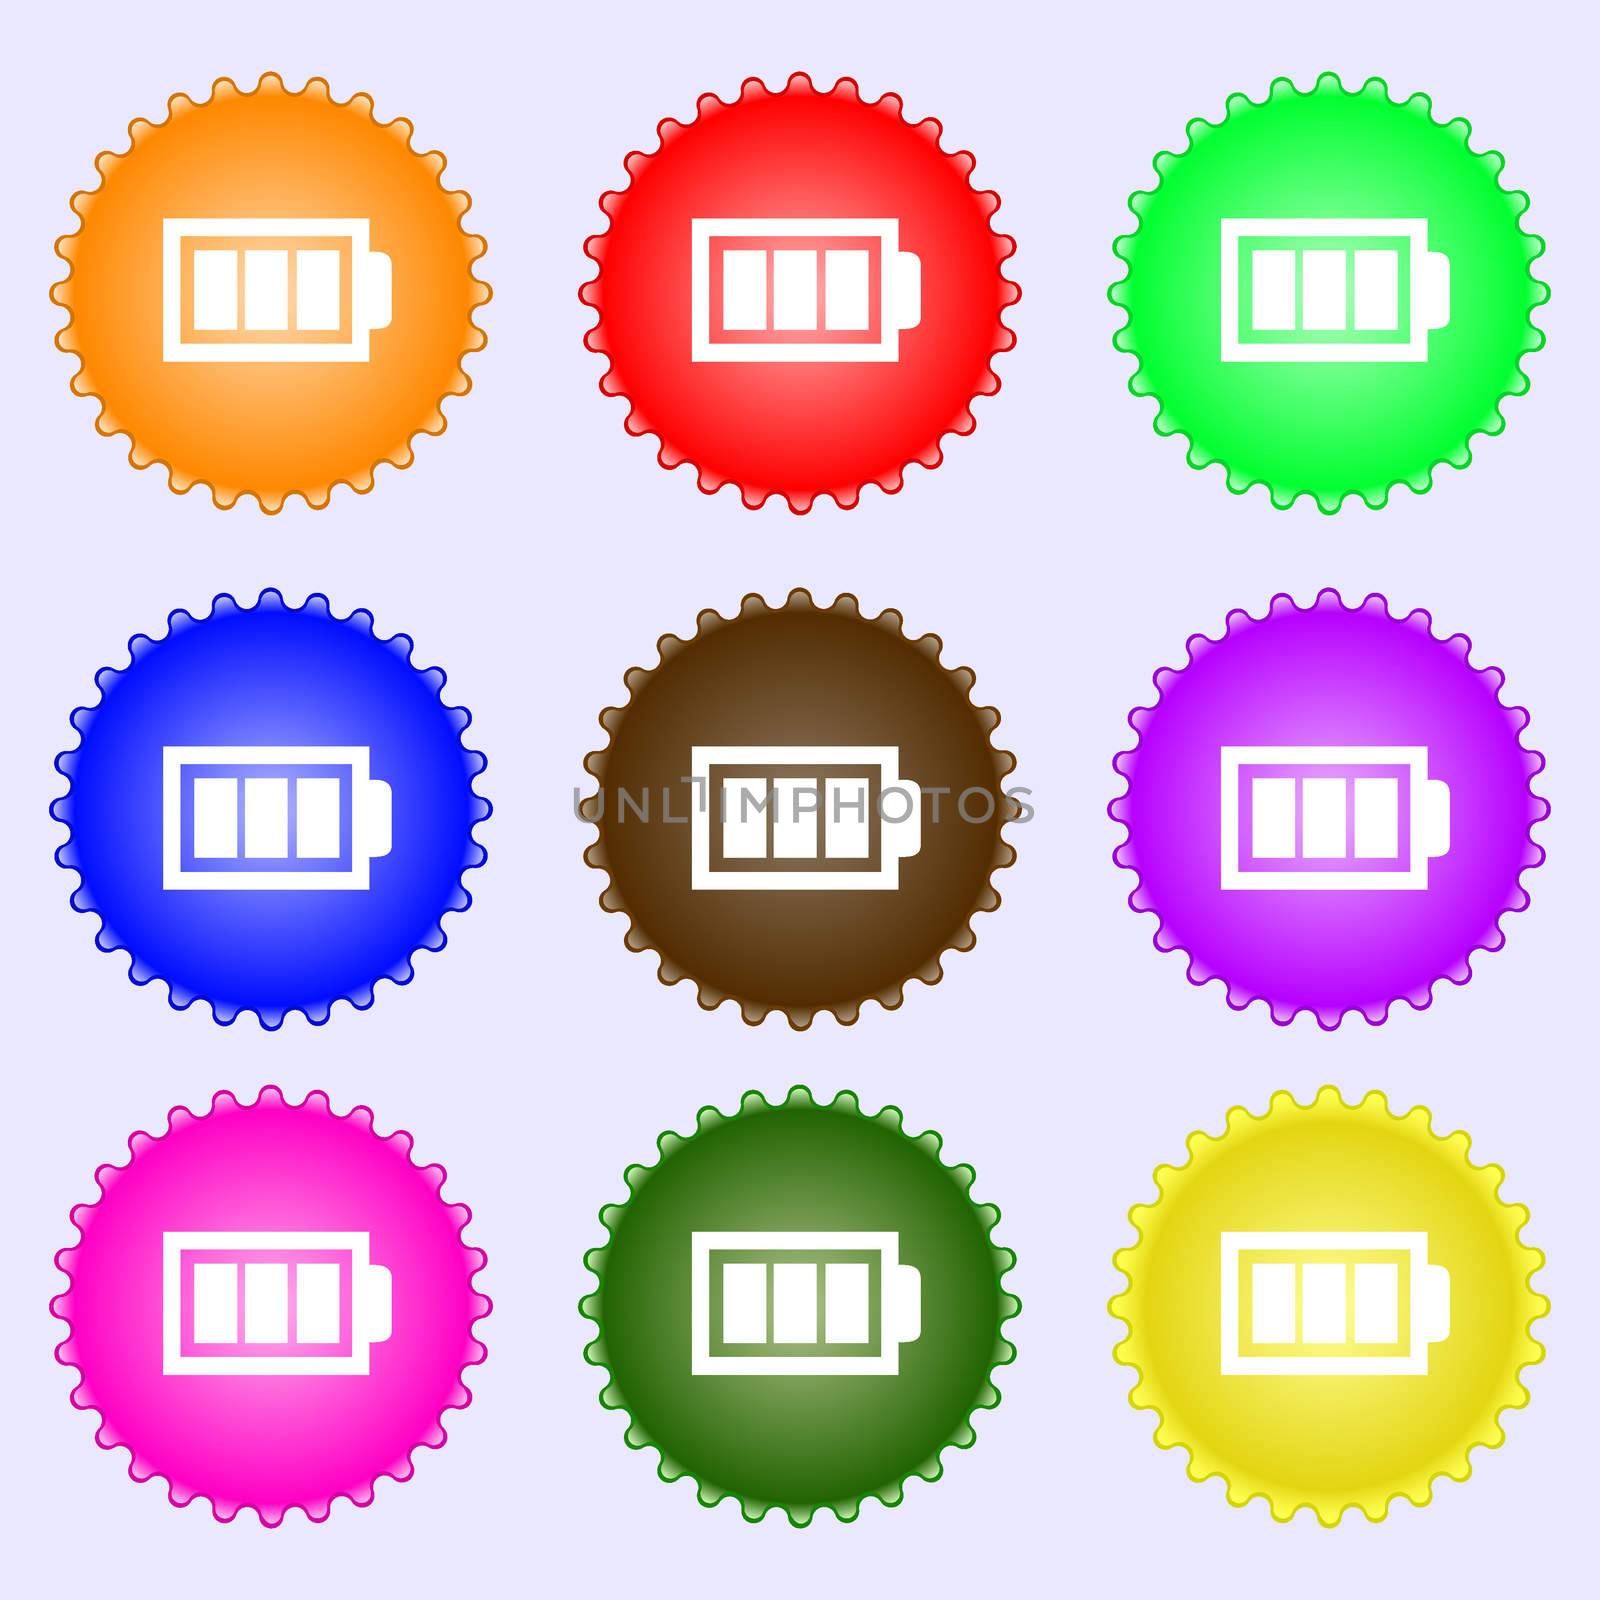 Battery fully charged sign icon. Electricity symbol. A set of nine different colored labels. illustration